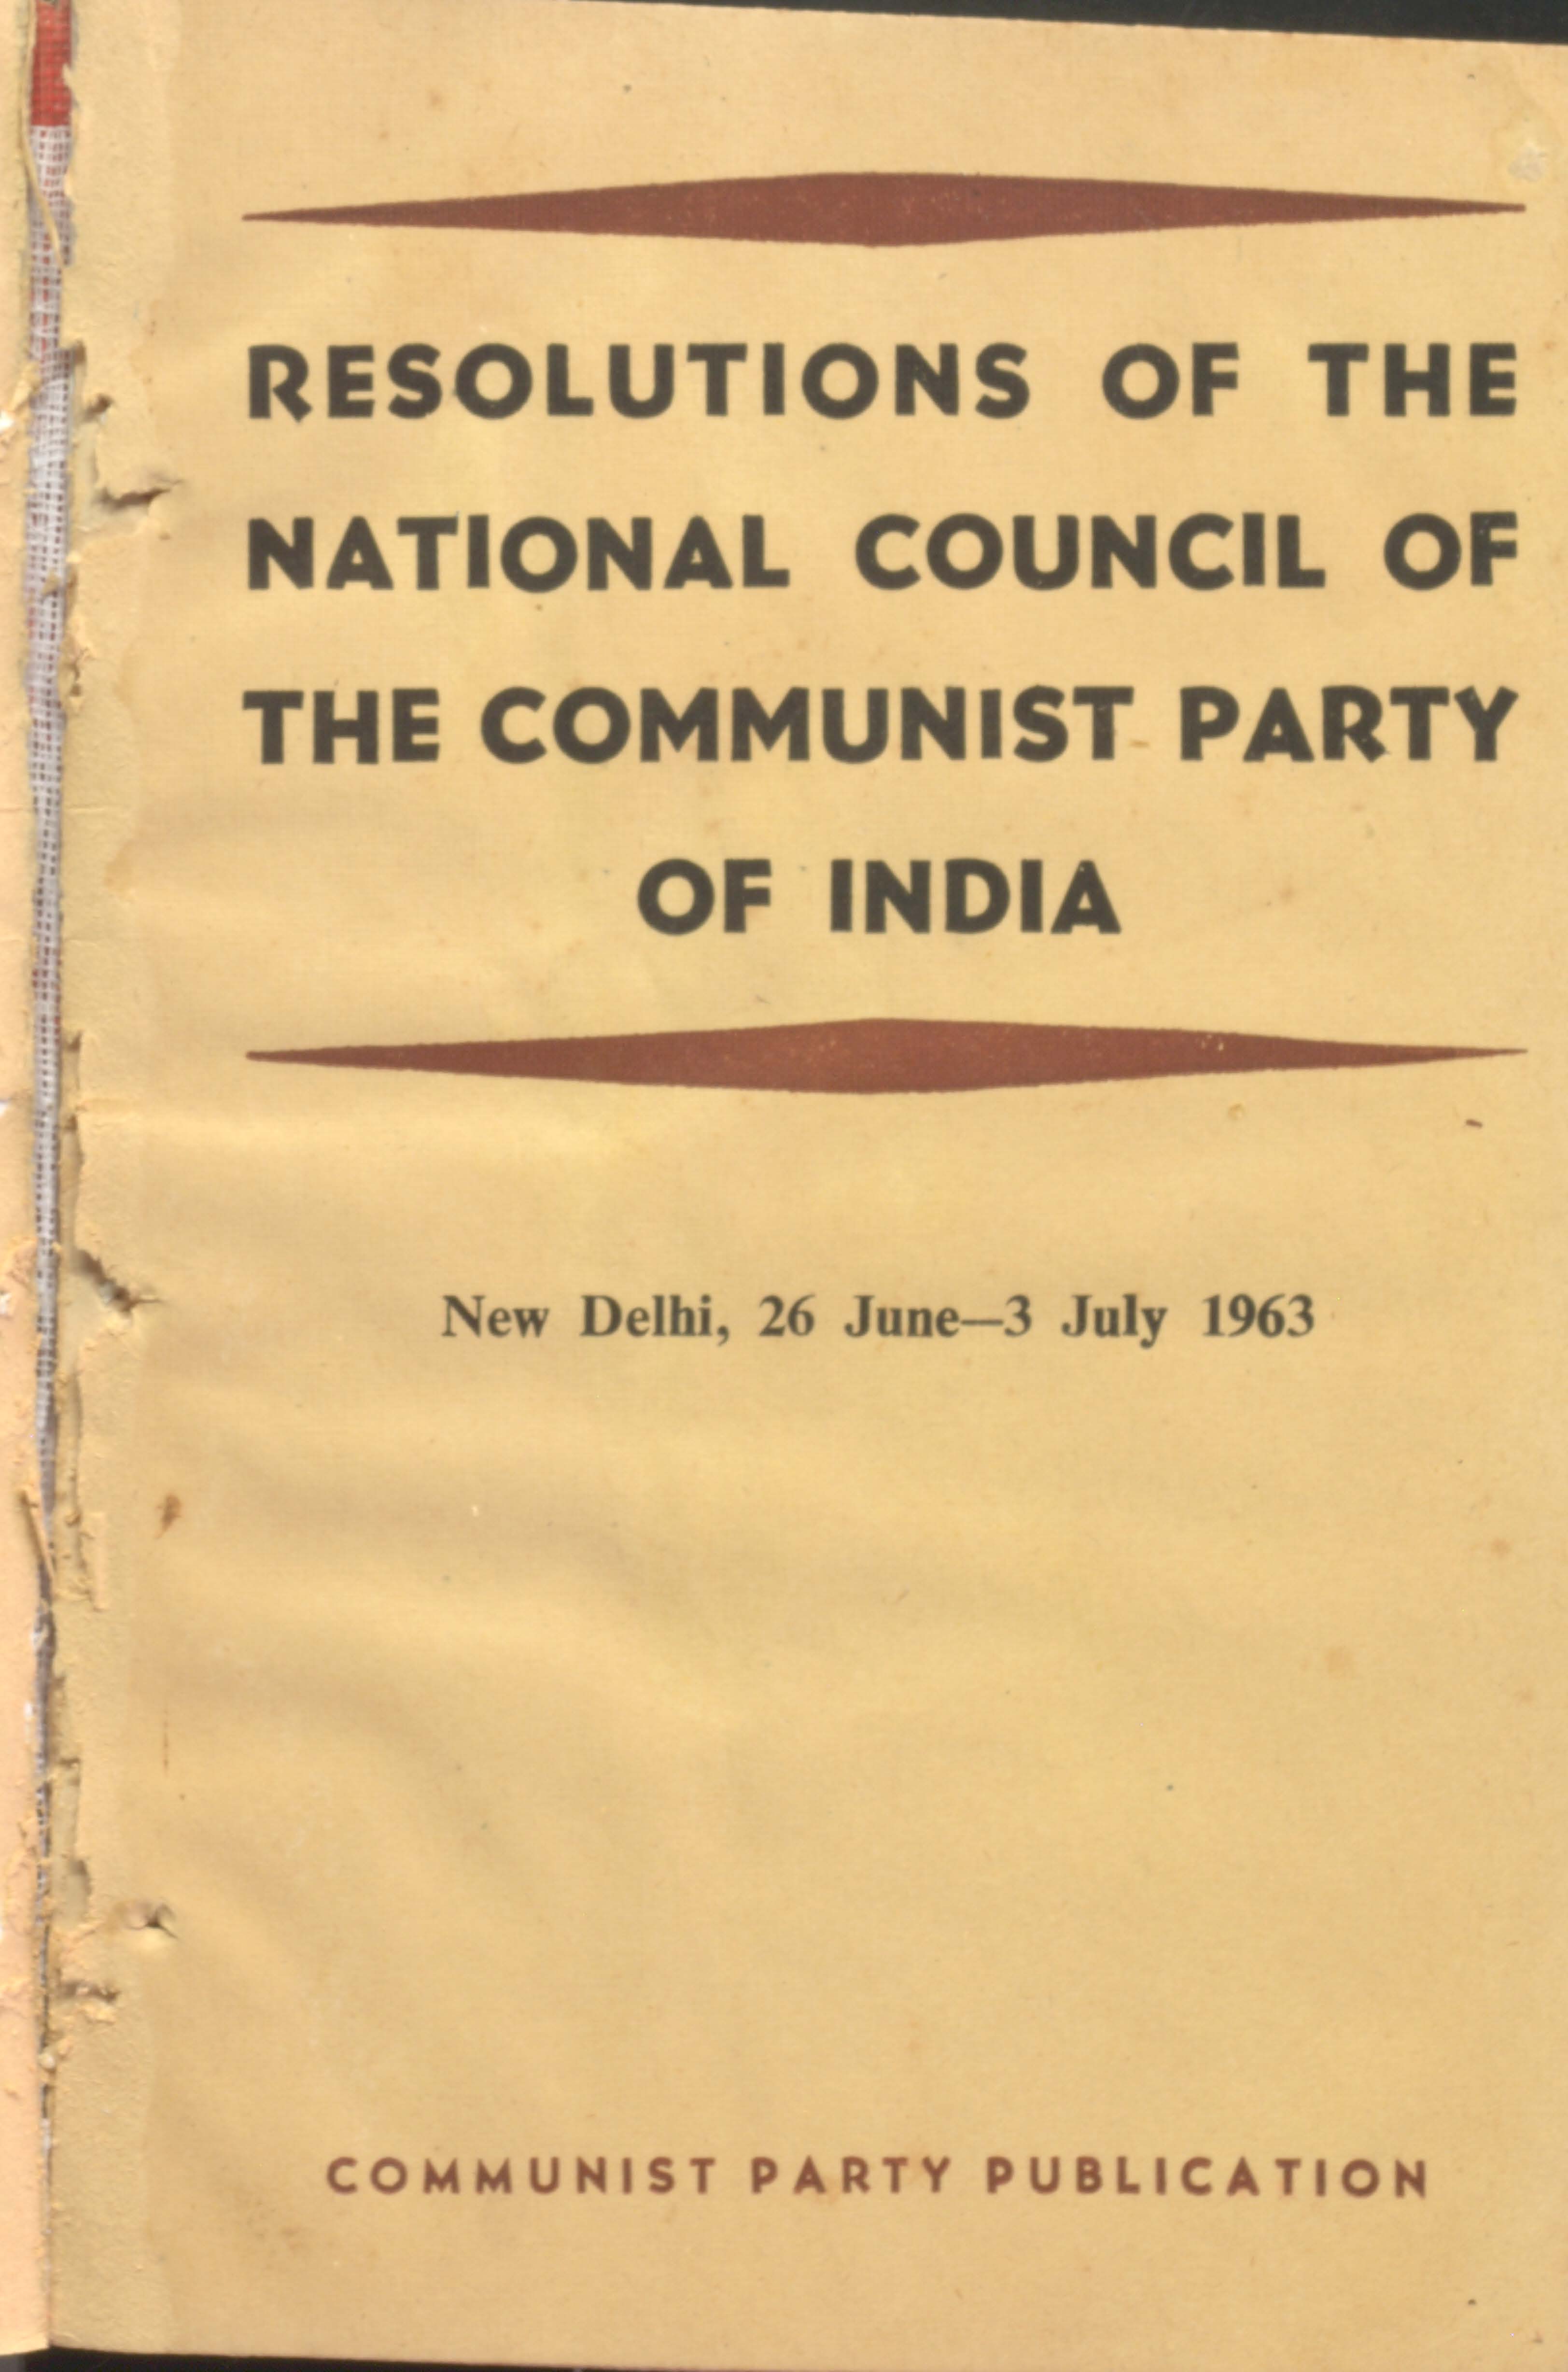 Resolutions of the National Council Of The CPI june-3 july 1963